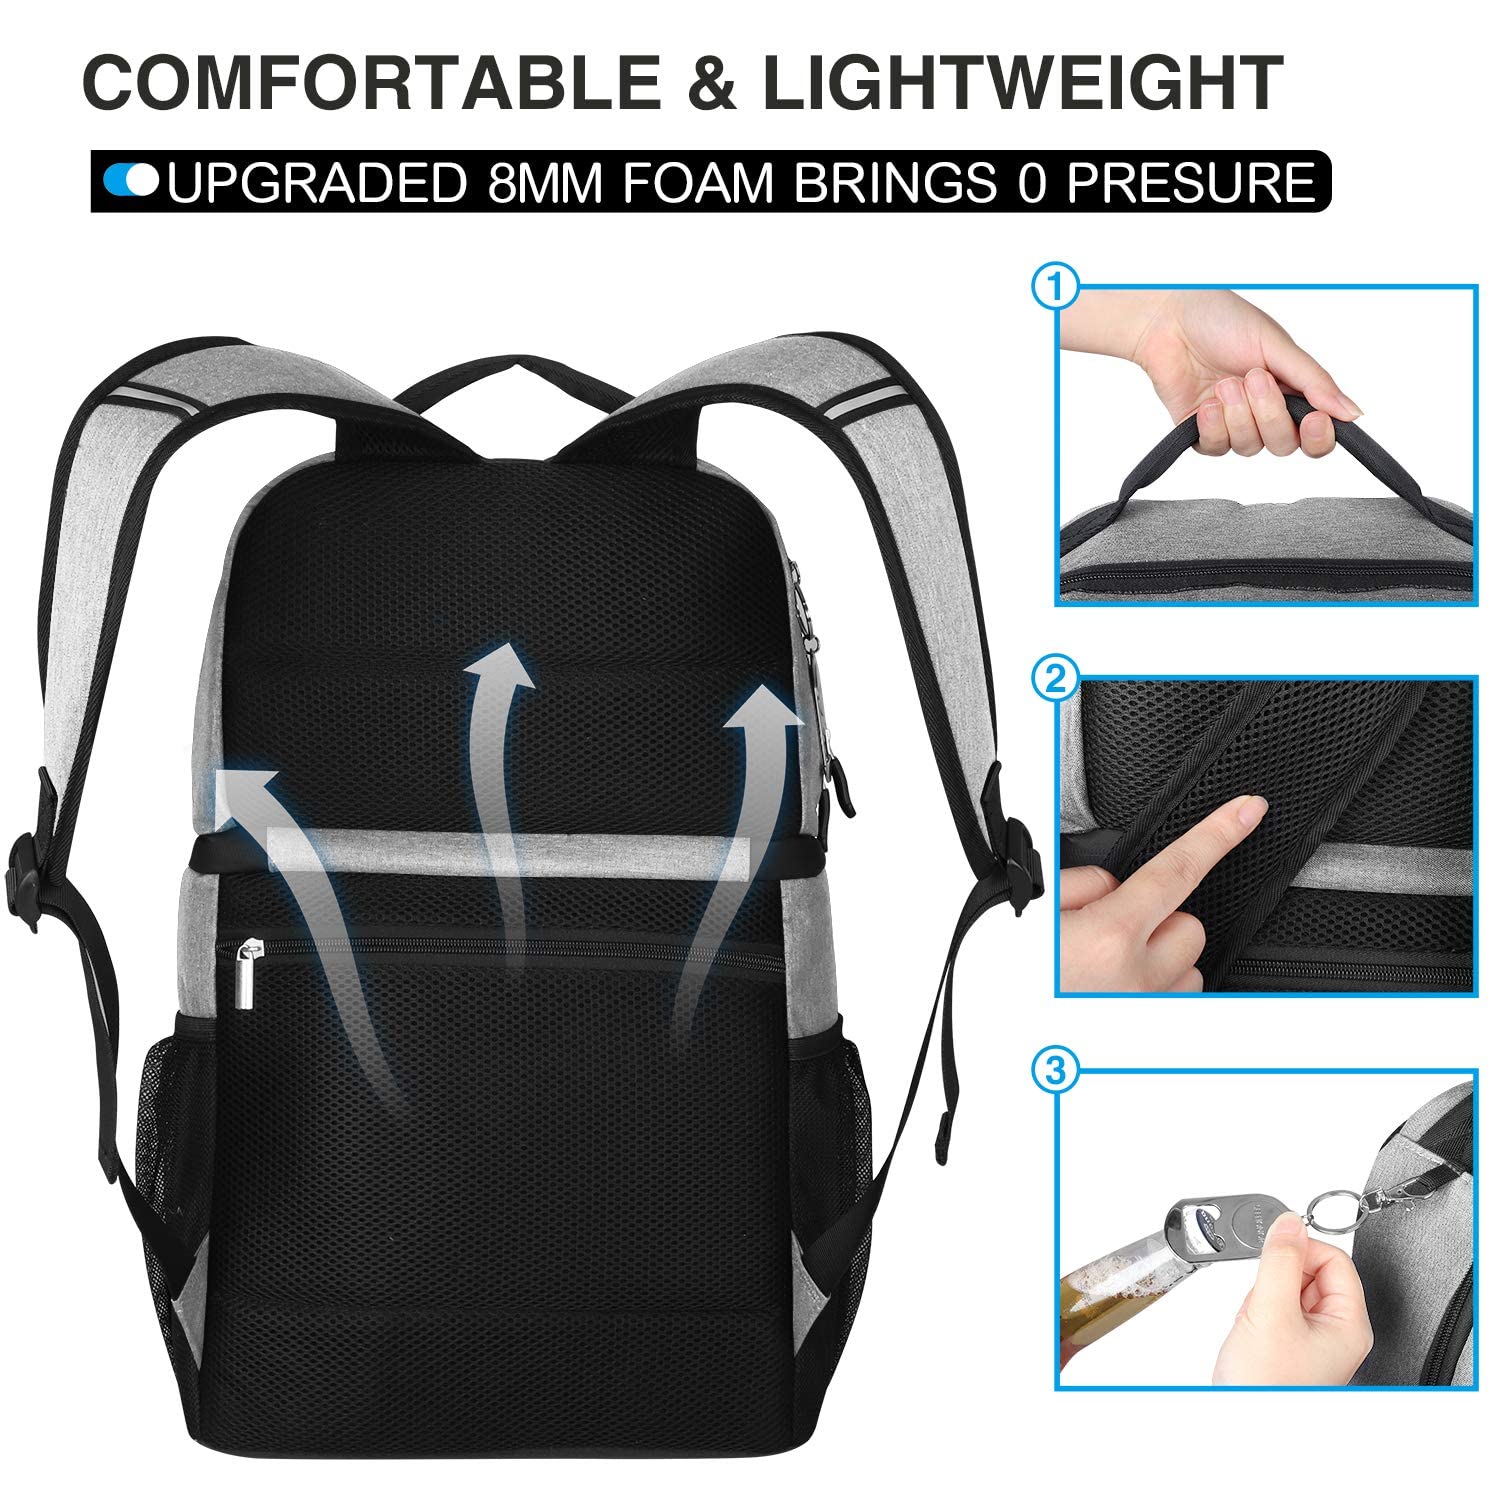 Double Deck Insulated Cooler Backpack, Leakproof Spacious Lightweight Soft Cooler Bag Backpack Cooler for Men Women to Work Travel Hiking Beach